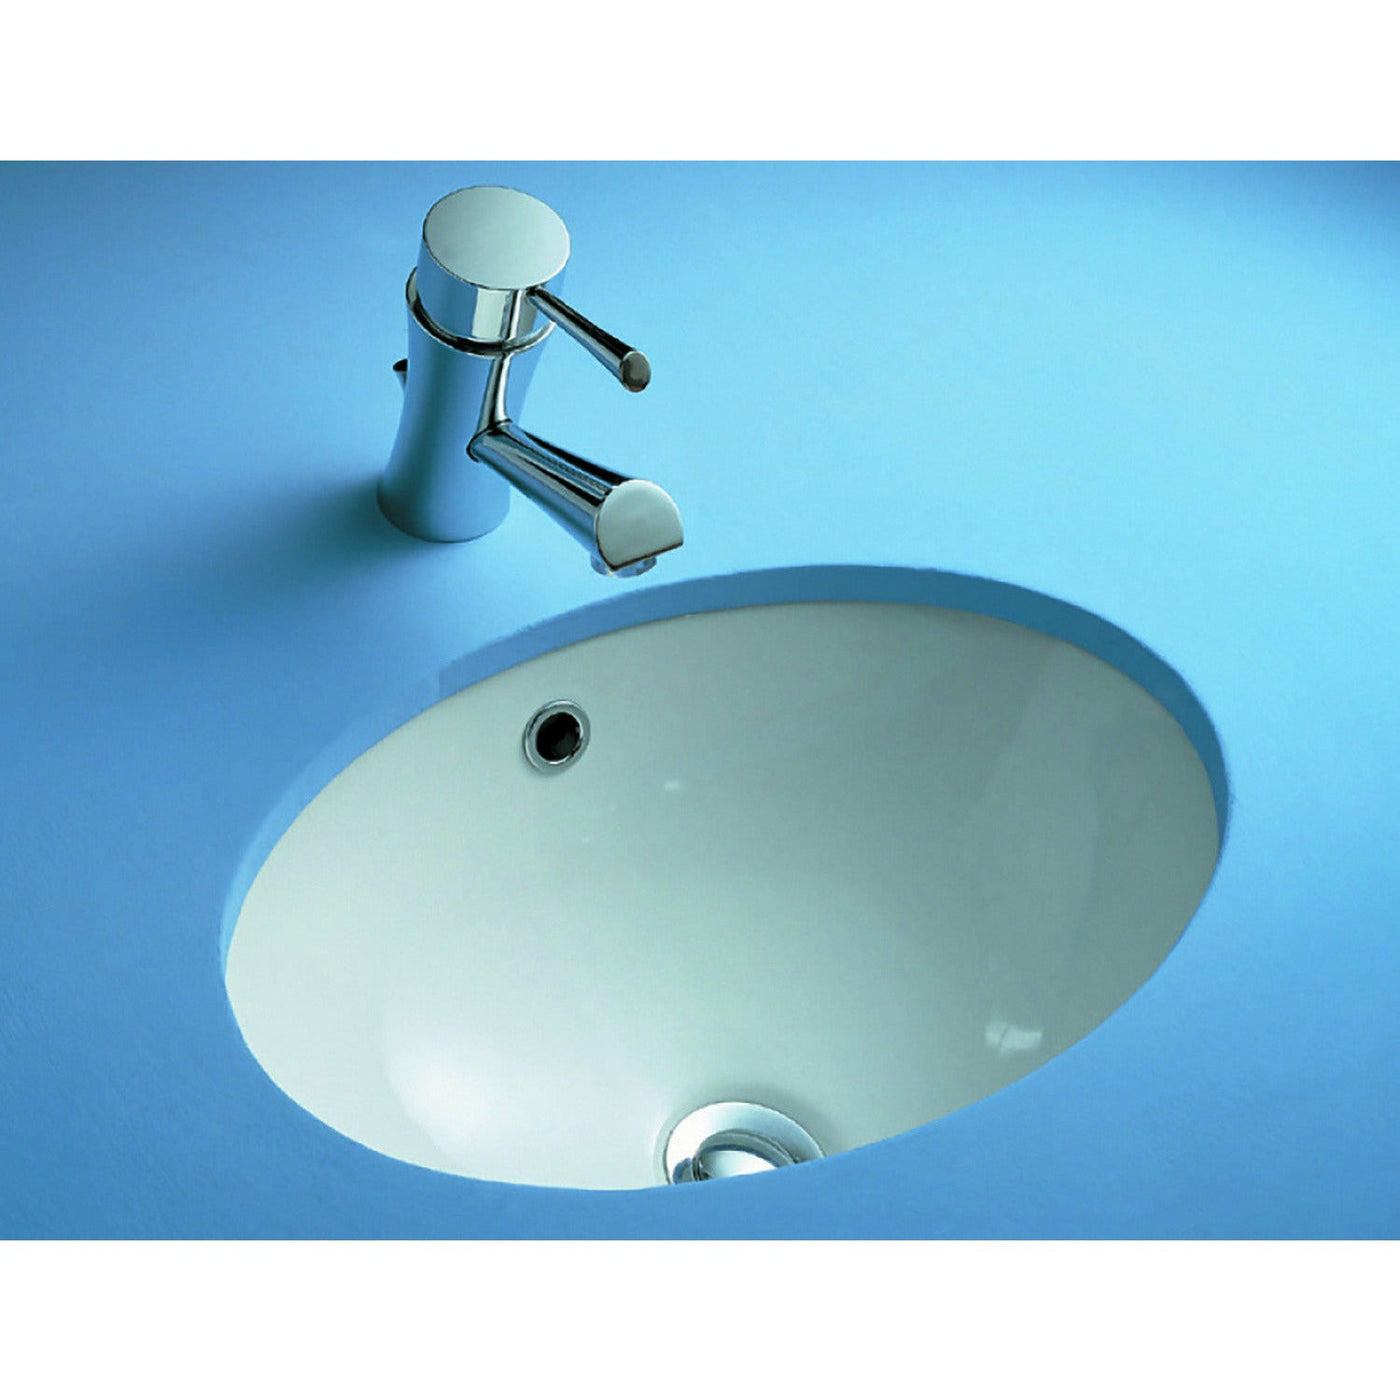 Oval 465mm Under-the-Counter Basin - Inset | The Lily - Letta London - 